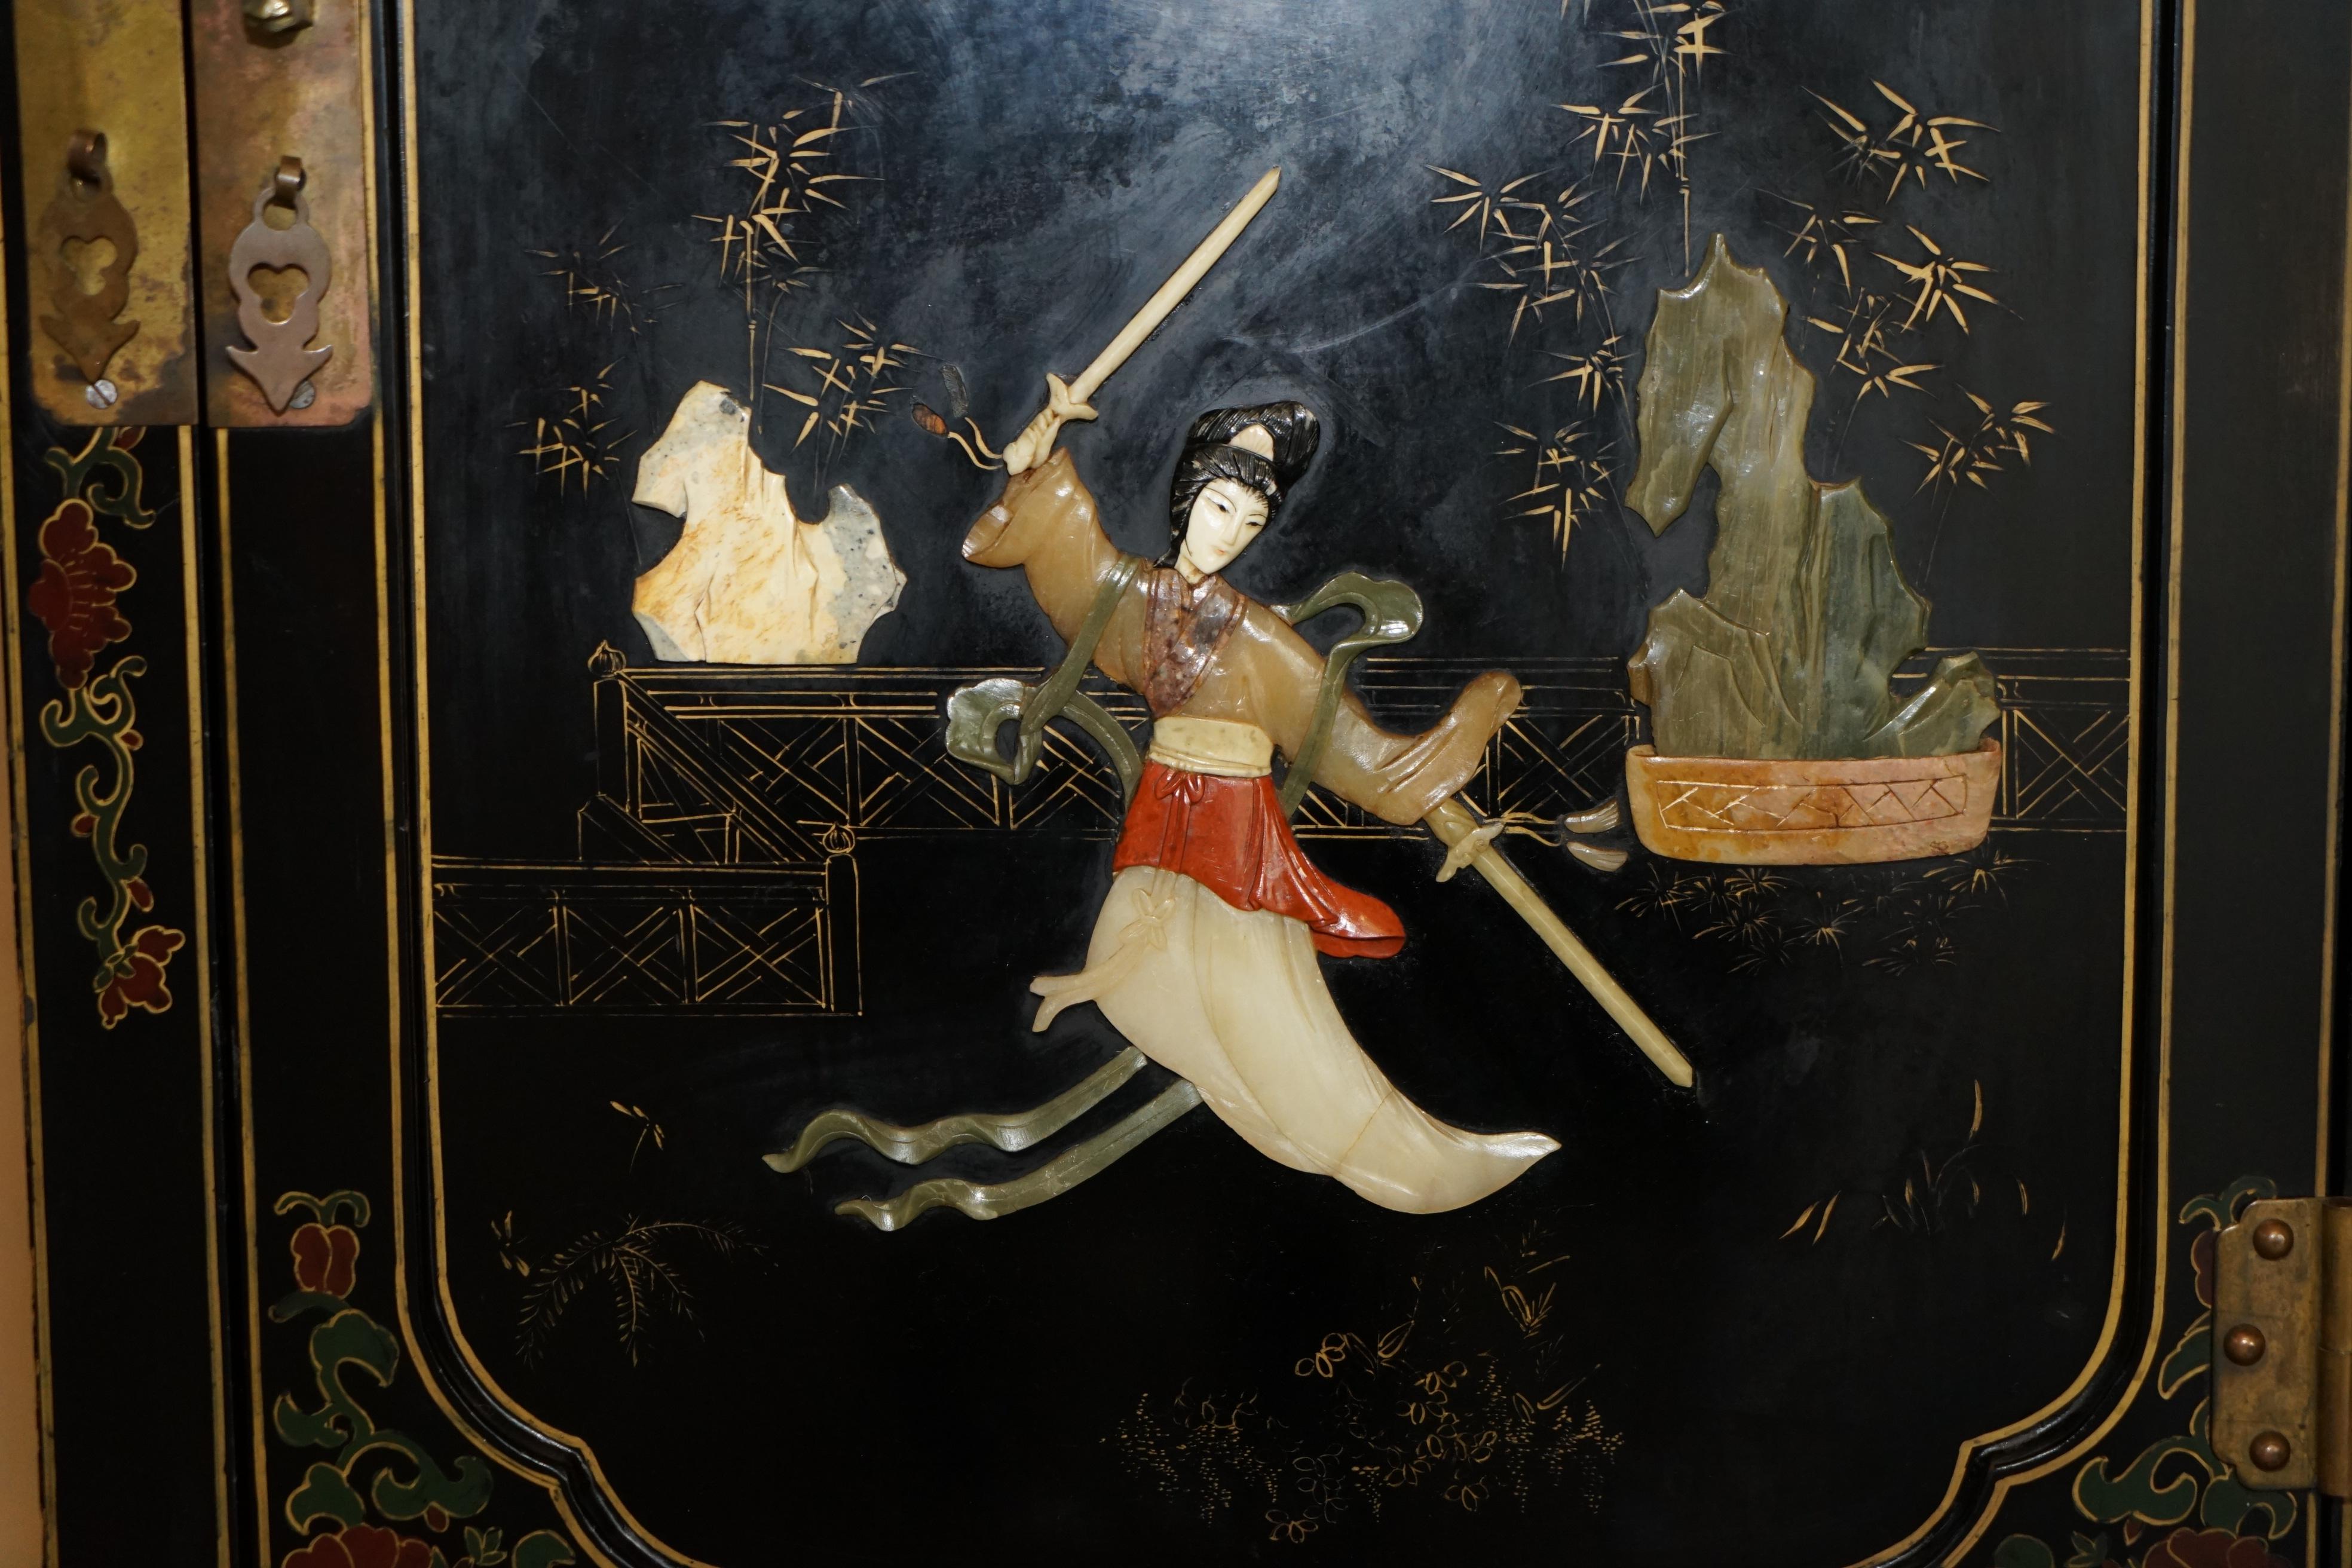 LOVELY ViNTAGE CHINESE CHINOISERIE SAMURAI WARRIOR LACQUER SIDE CABINET SOAPSTON (Chinesisch) im Angebot